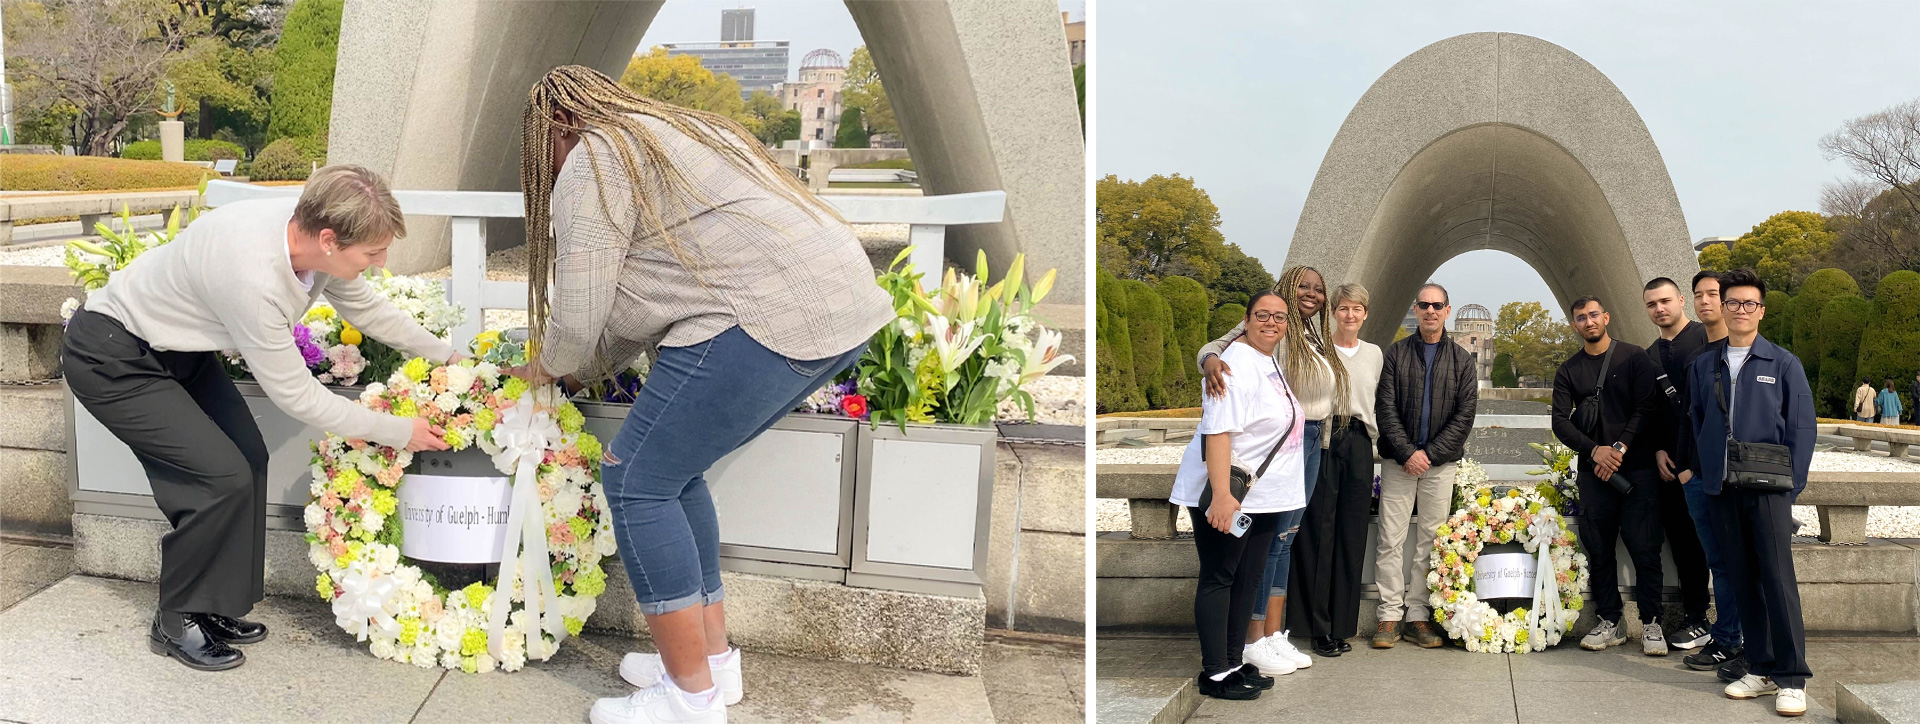 Left photo: two individuals putting down a wreath in front of Hiroshima Victims Memorial Cenotaph. Right photo: a group of individuals standing in front of the Hiroshima Victims Memorial Cenotaph for a photo